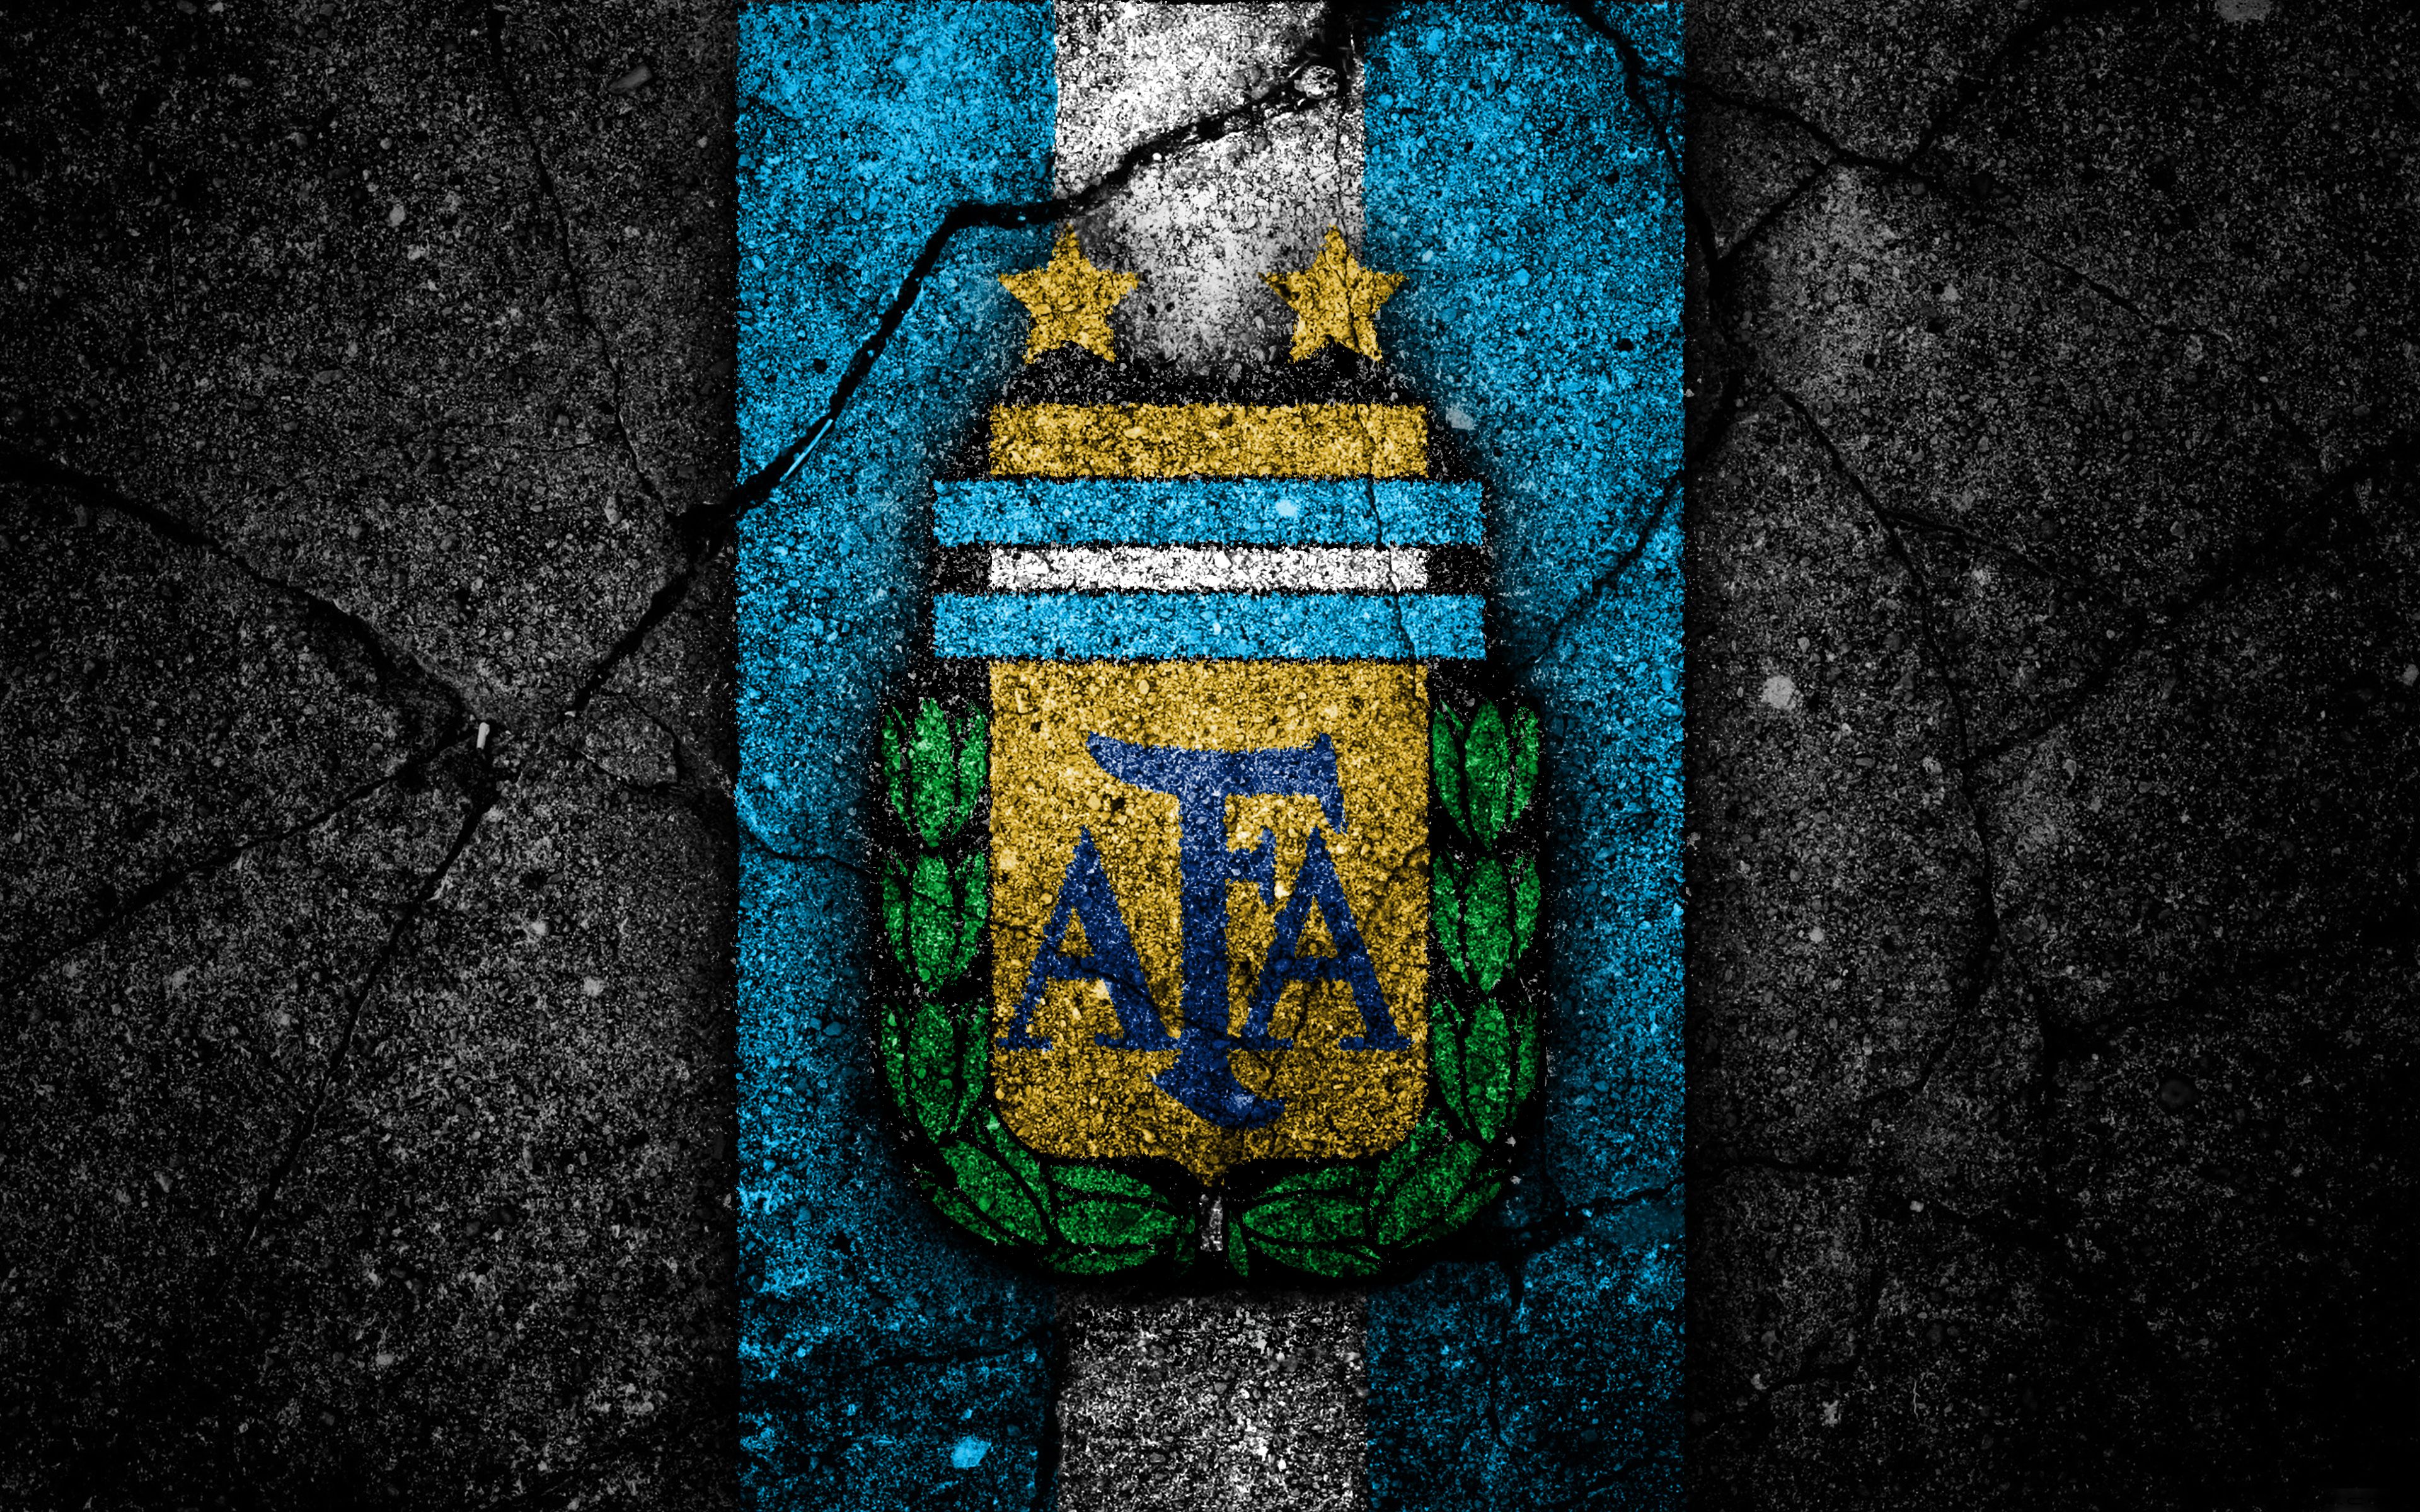 Argentina Flag Hd Wallpapers